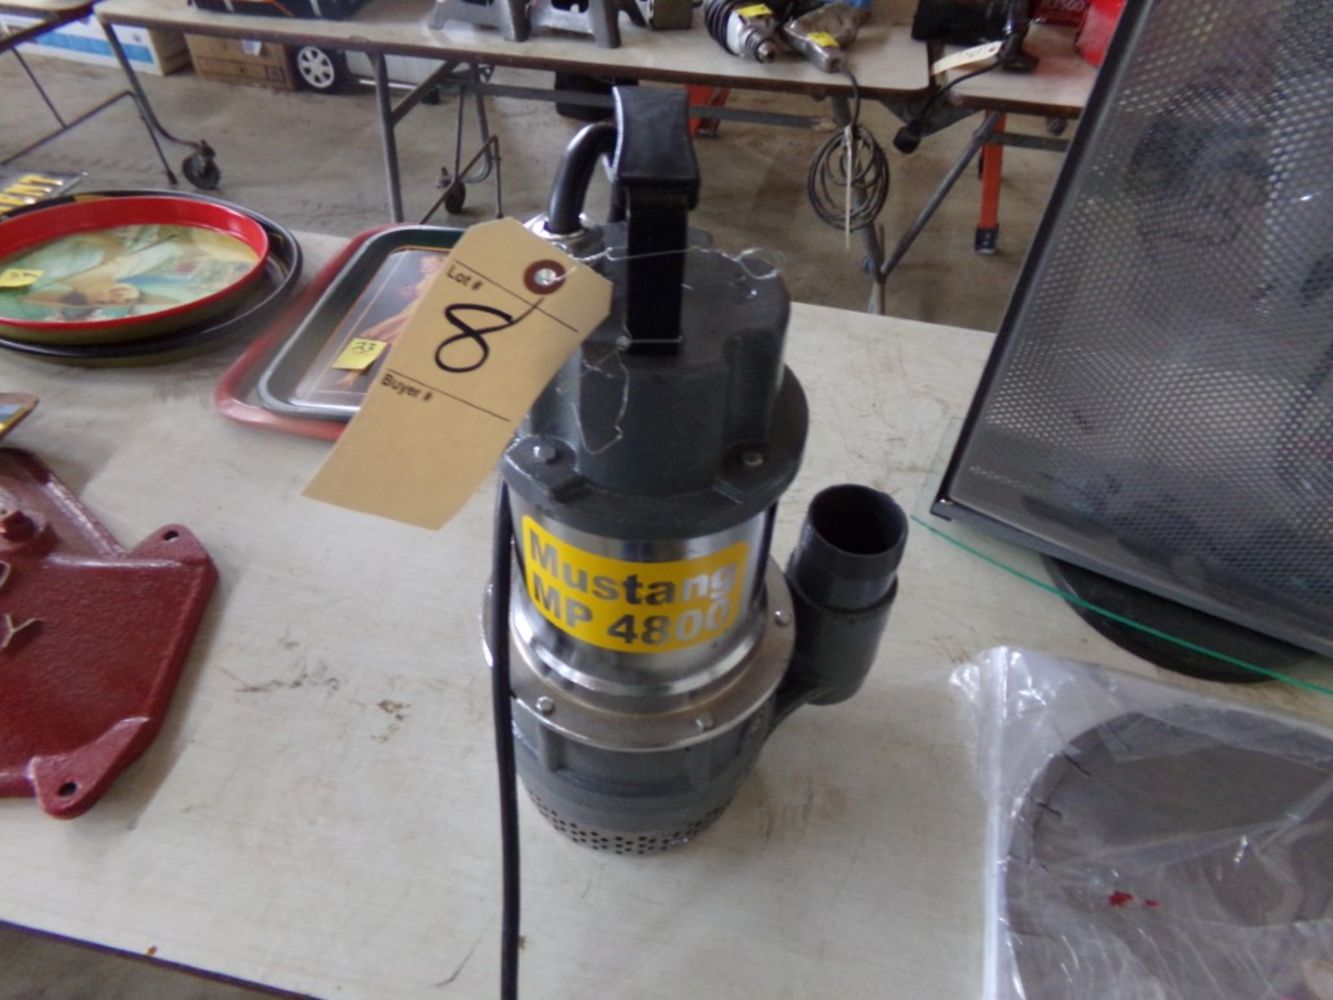 May 11 Equipment, Vehicles & Tools Auction